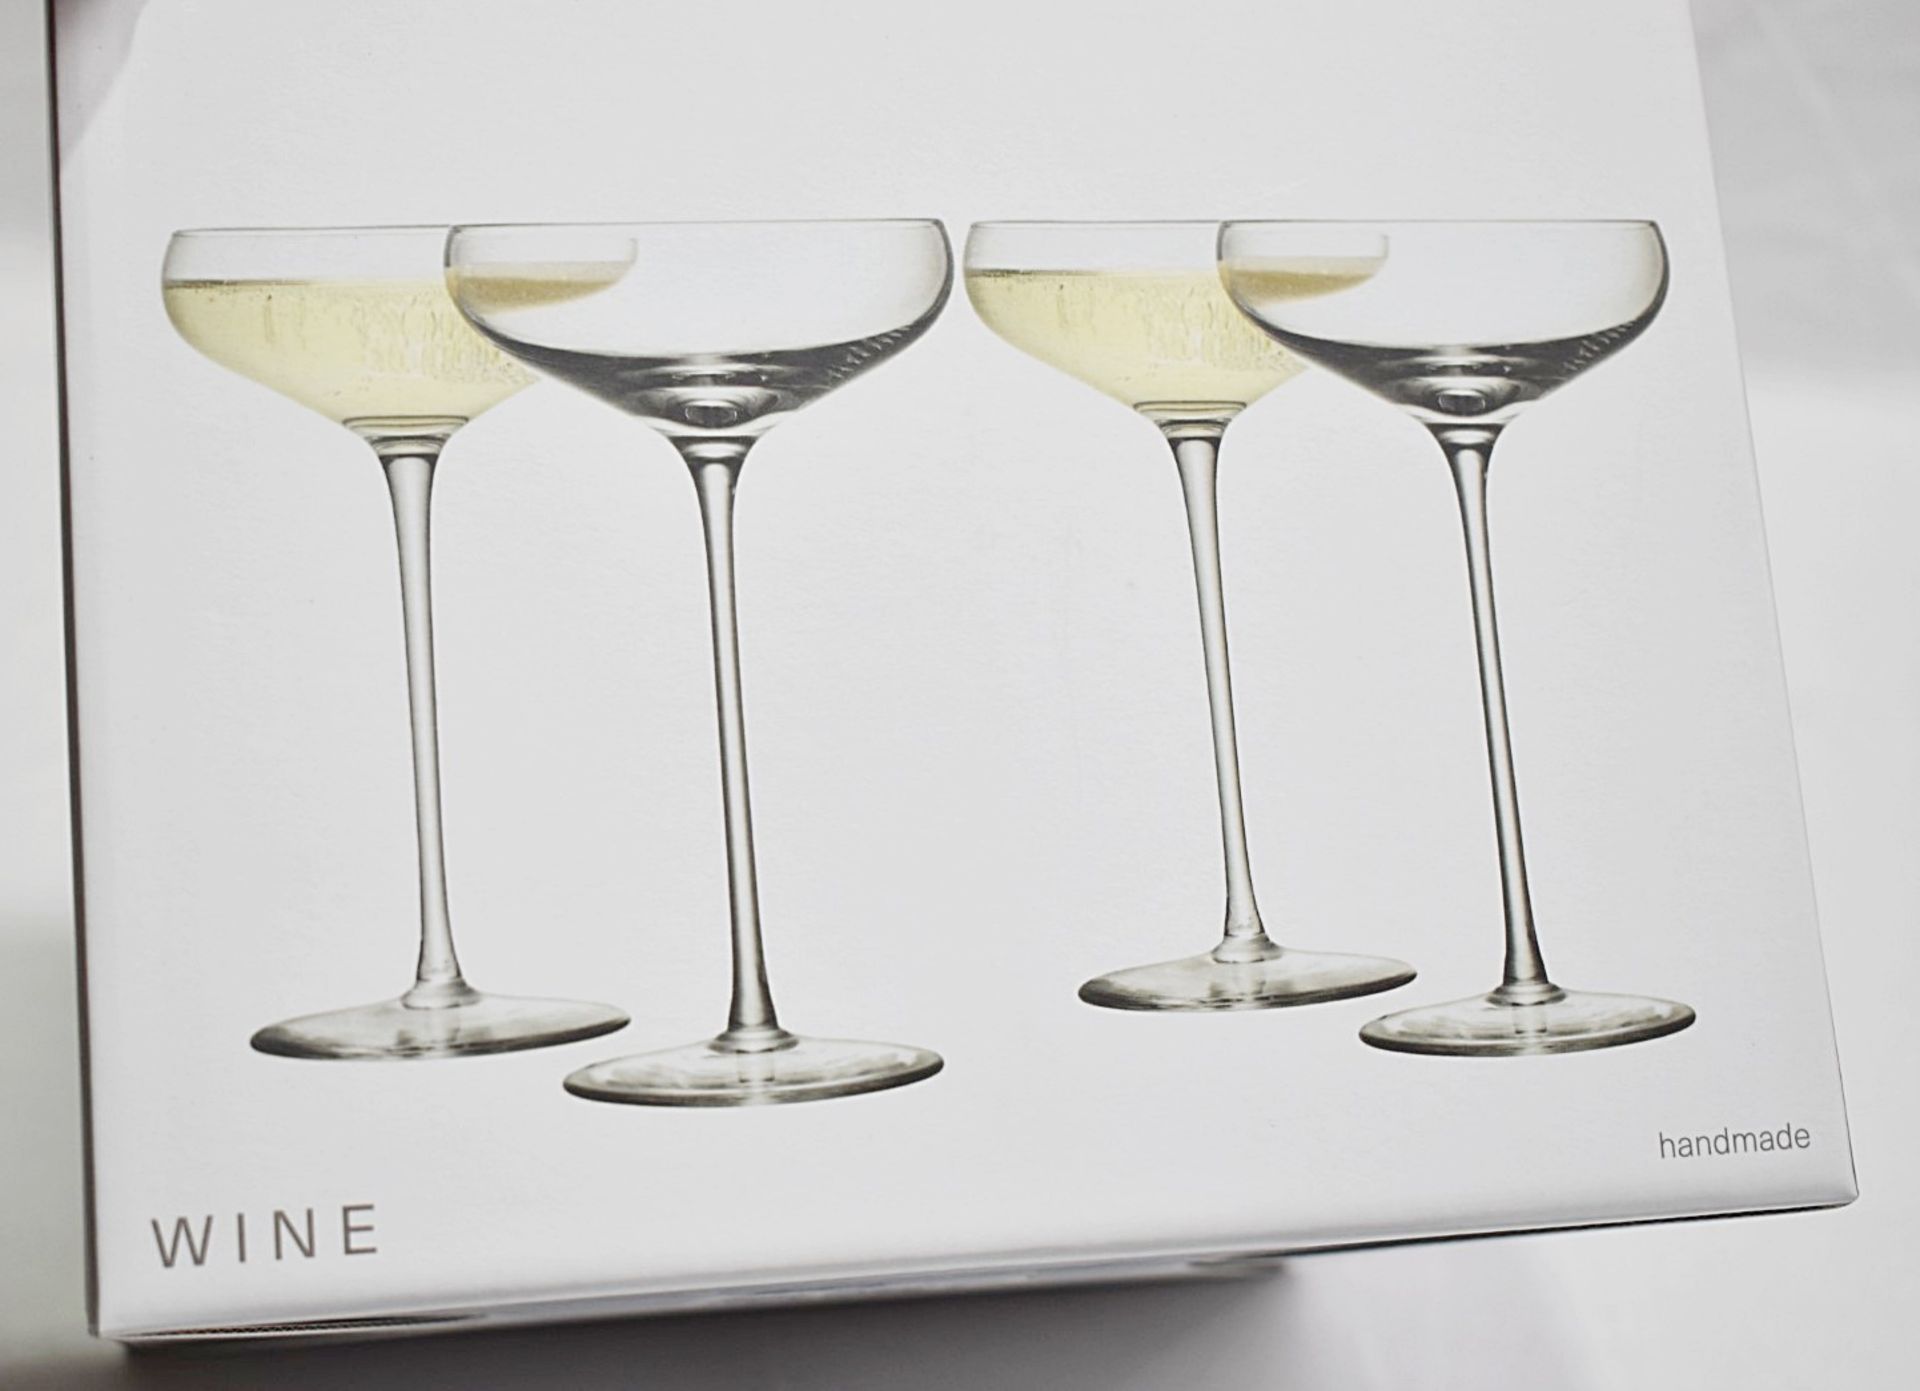 3 x LSA Wine Collection Handmade Champagne Saucers - 300ml - Unused Boxed Stock - Ref: HJL522 / - Image 4 of 6